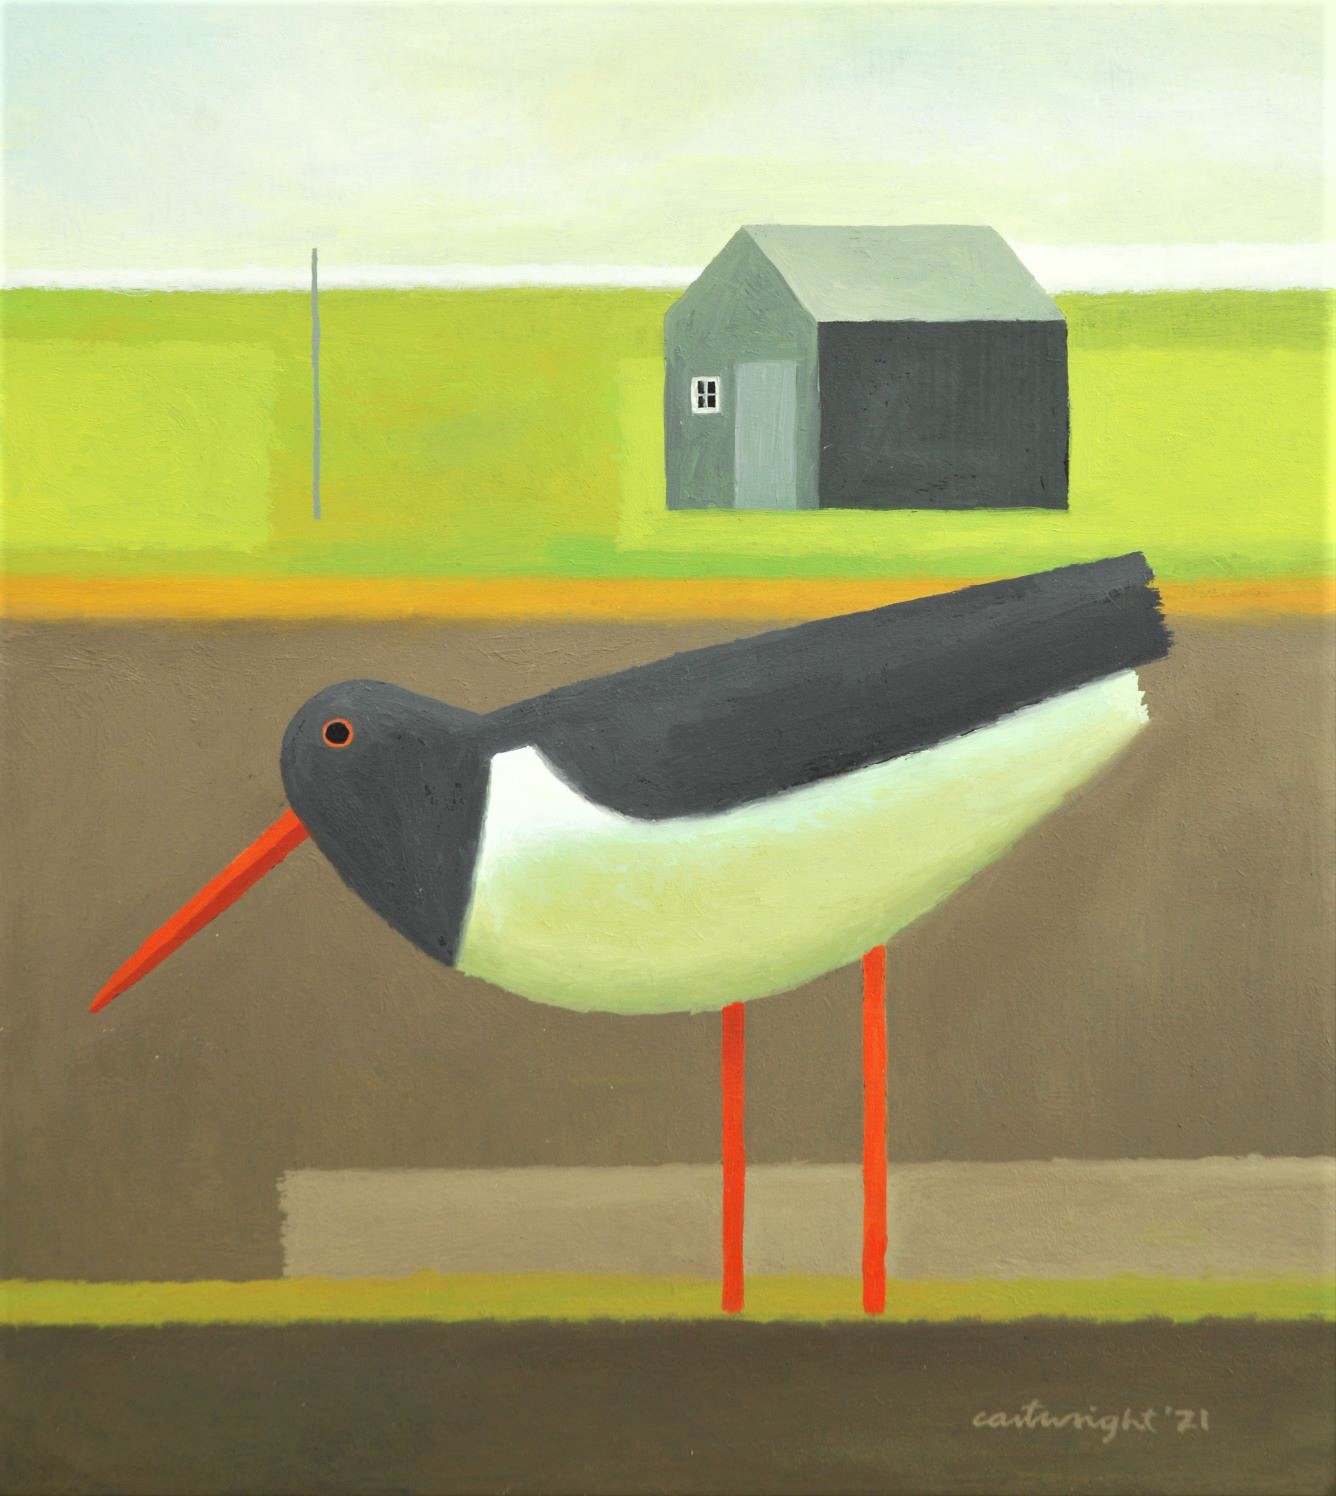 oystercatcher painted by reg cartwright 2021